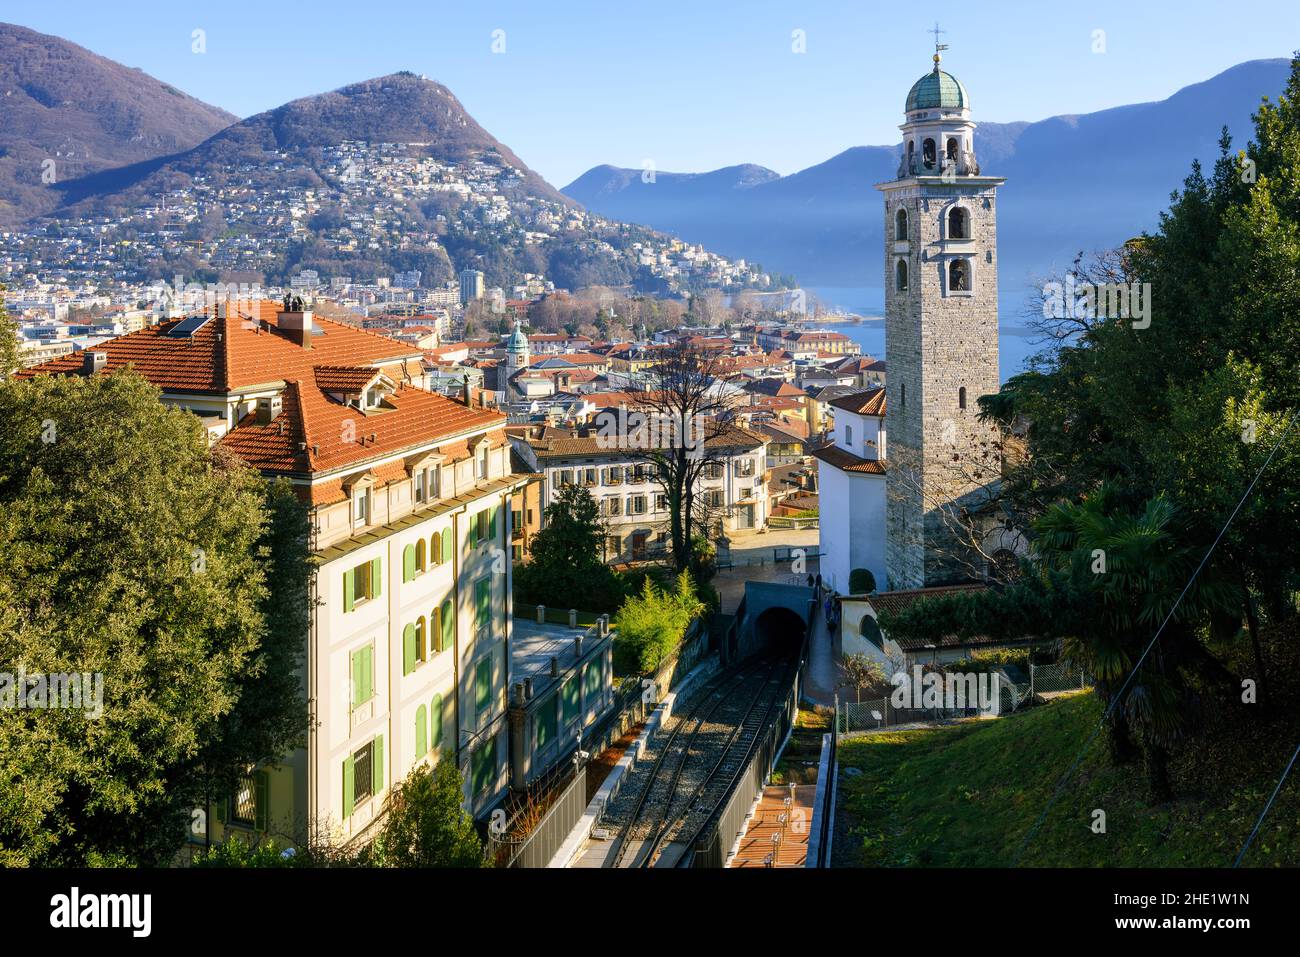 Lugano cityscape, view of the Cathedral, Lake Lugano, Monte Bre and the Alps mountains, Switzerland Stock Photo